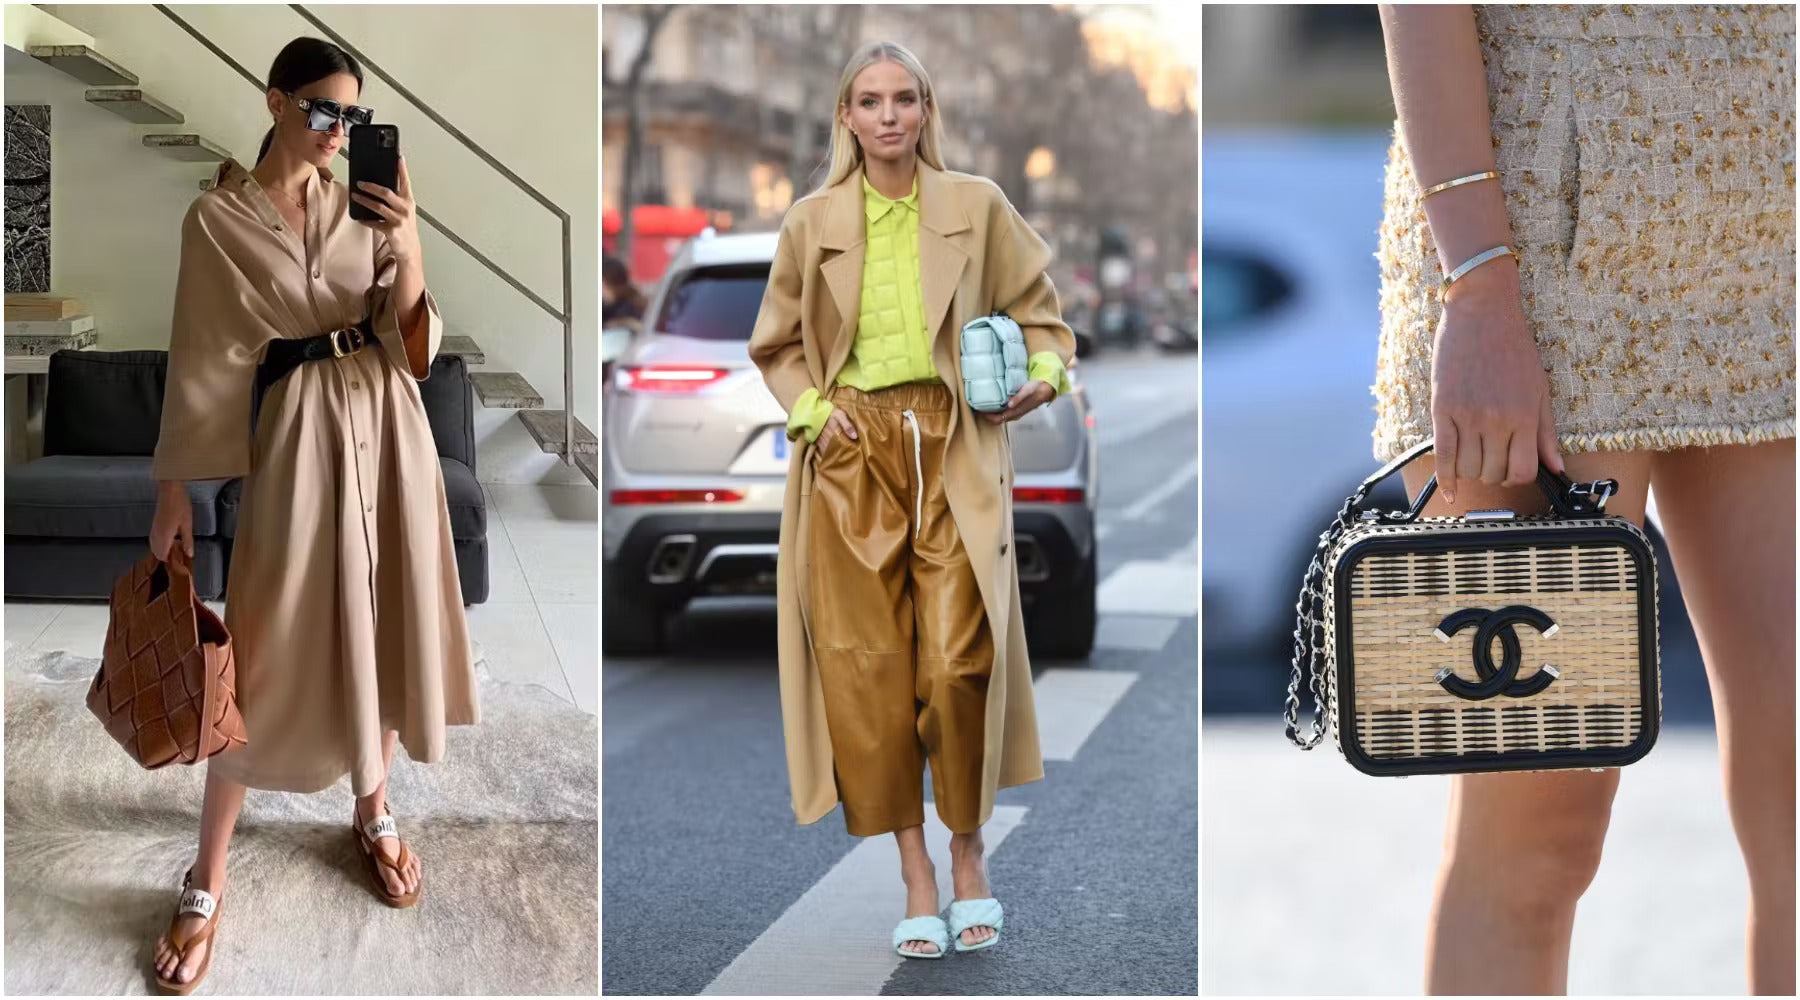 Handbag Trends 2023: 8 Bag Styles to Shop Right Now